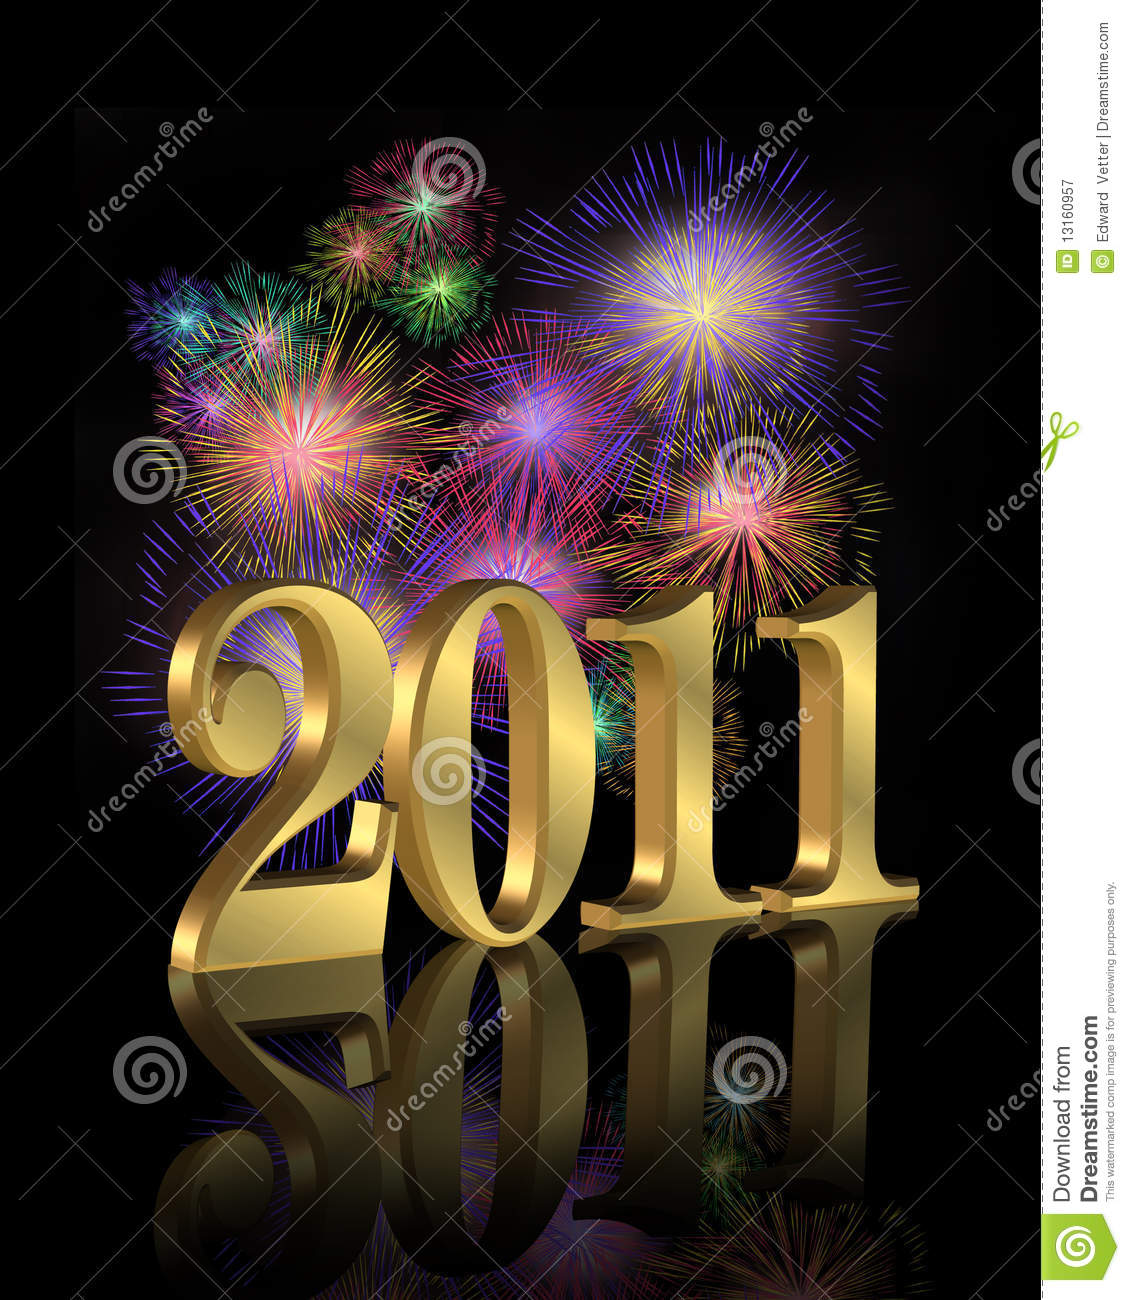 High Resolution Wallpaper | New Year 2011 1130x1300 px